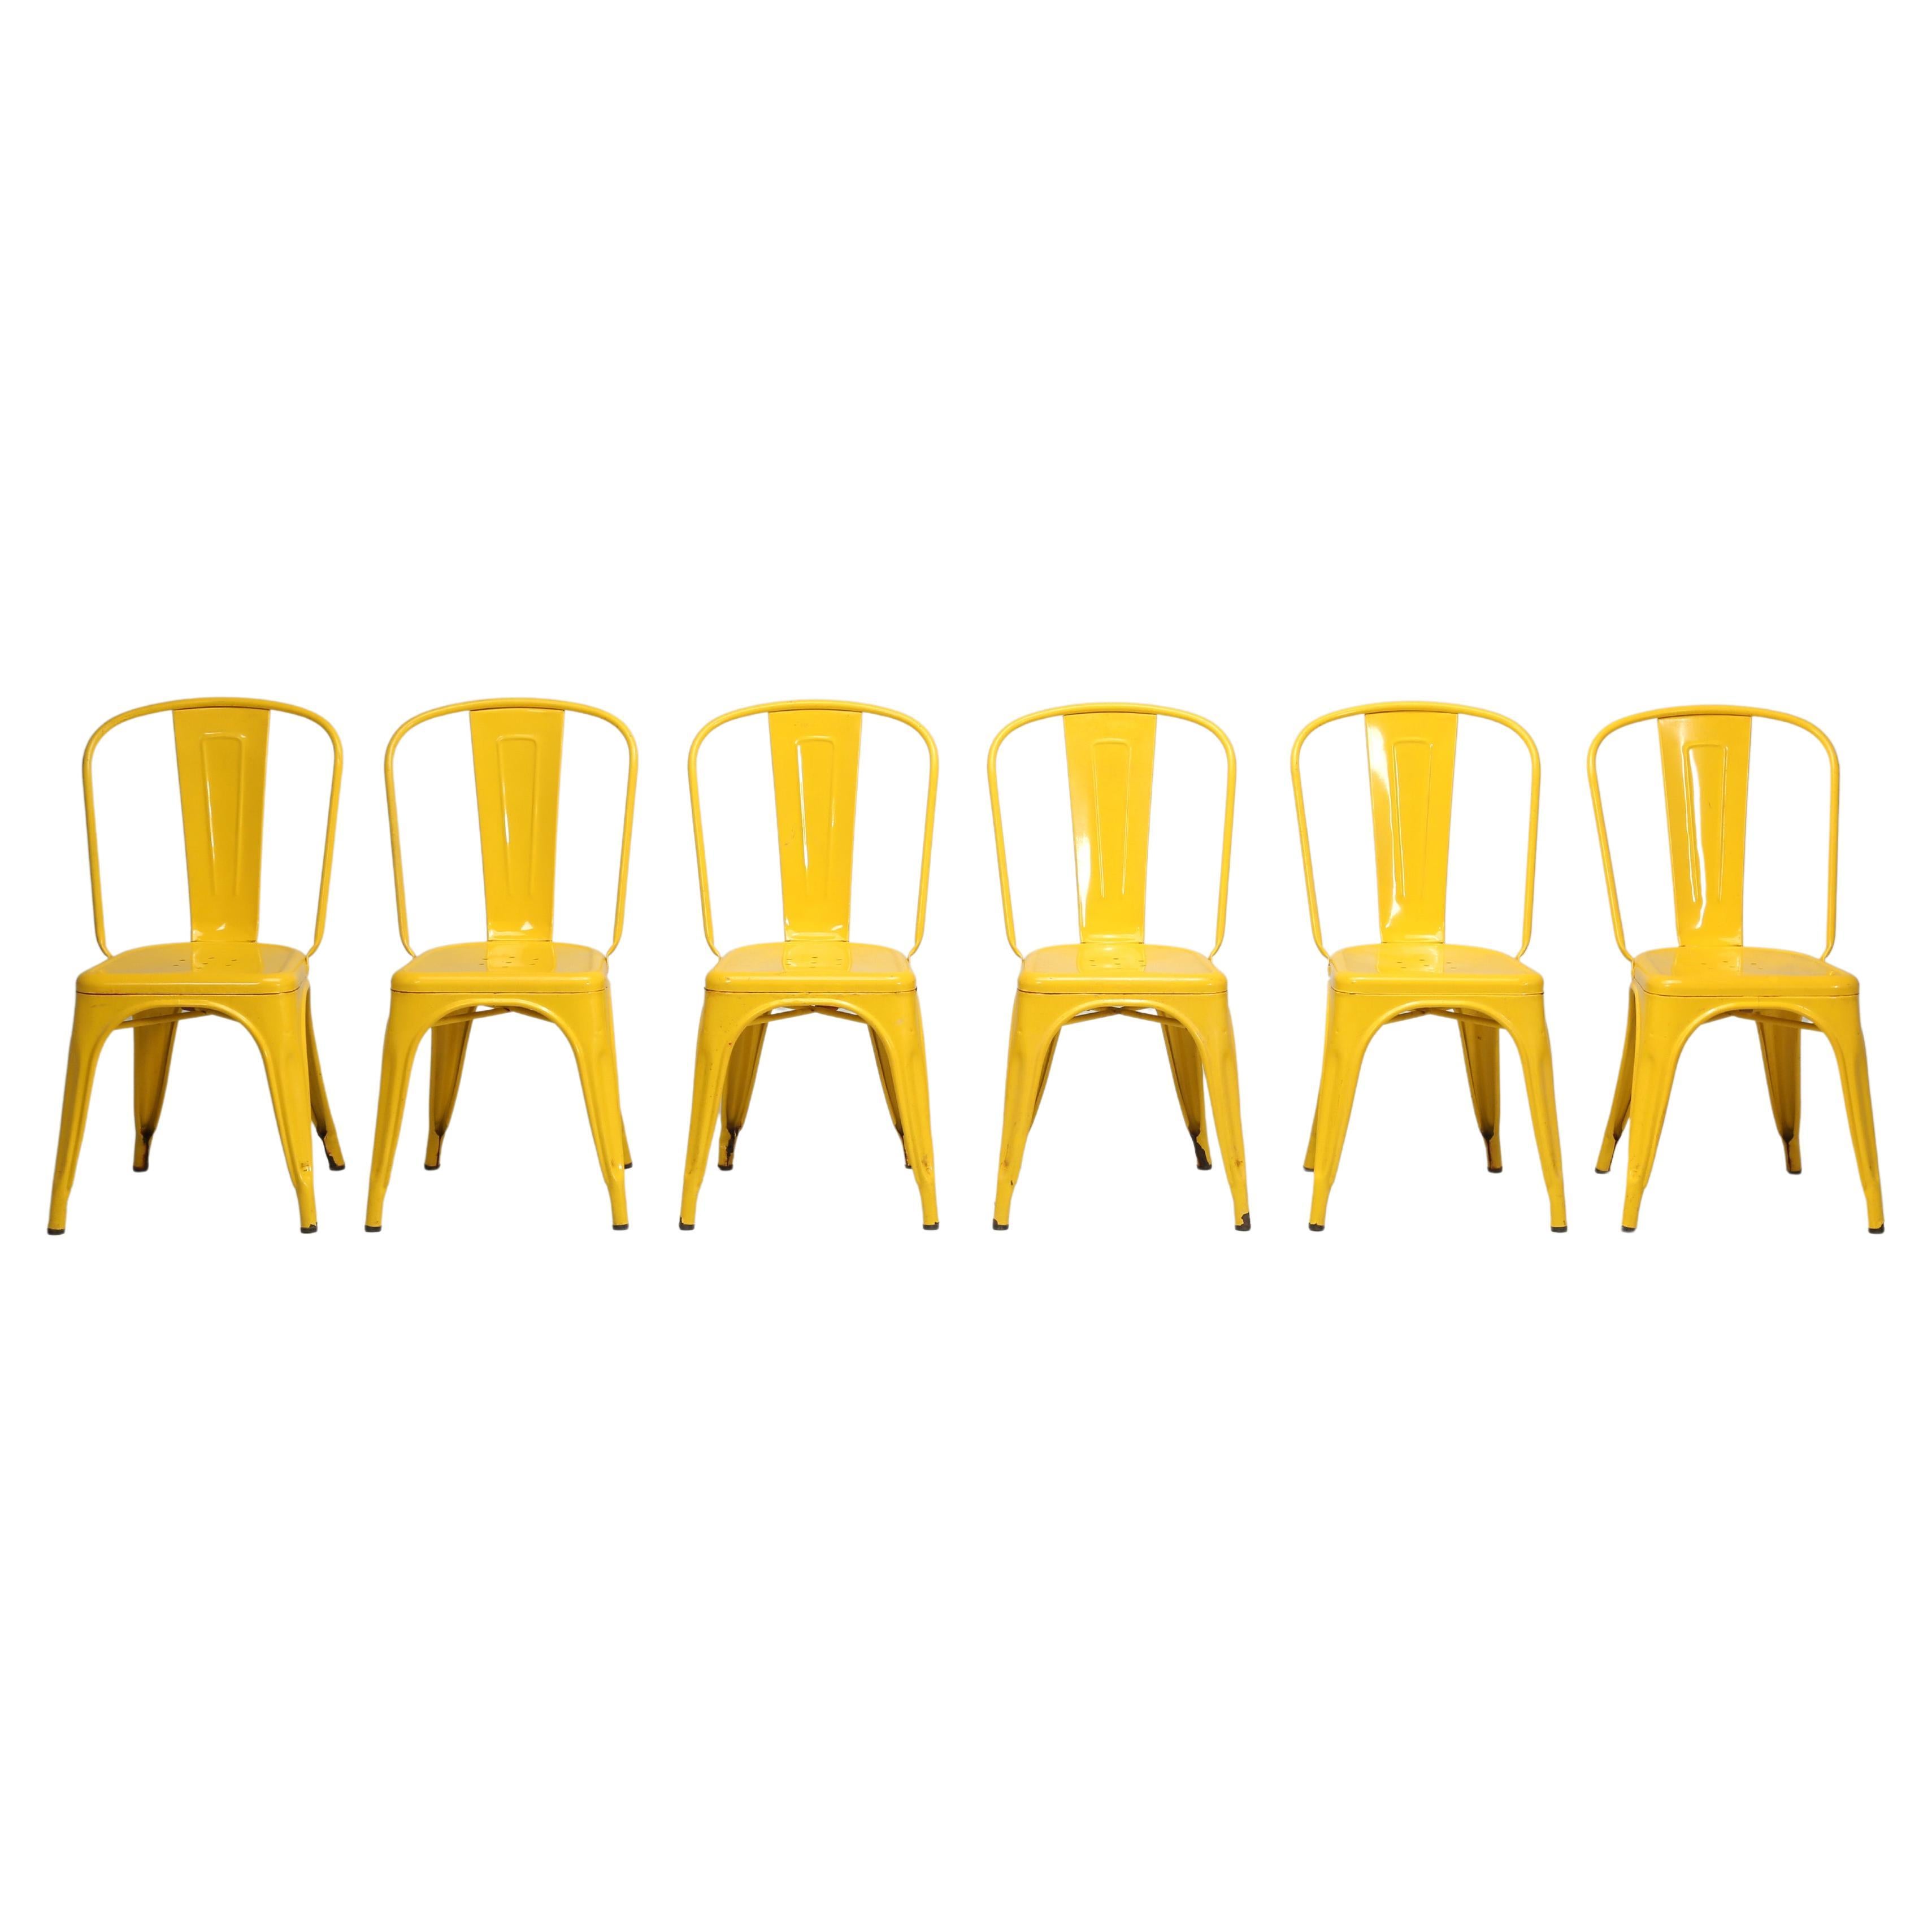 Set of '6' Vintage Yellow Tolix Stacking Dining Chairs for Indoors or Outdoor